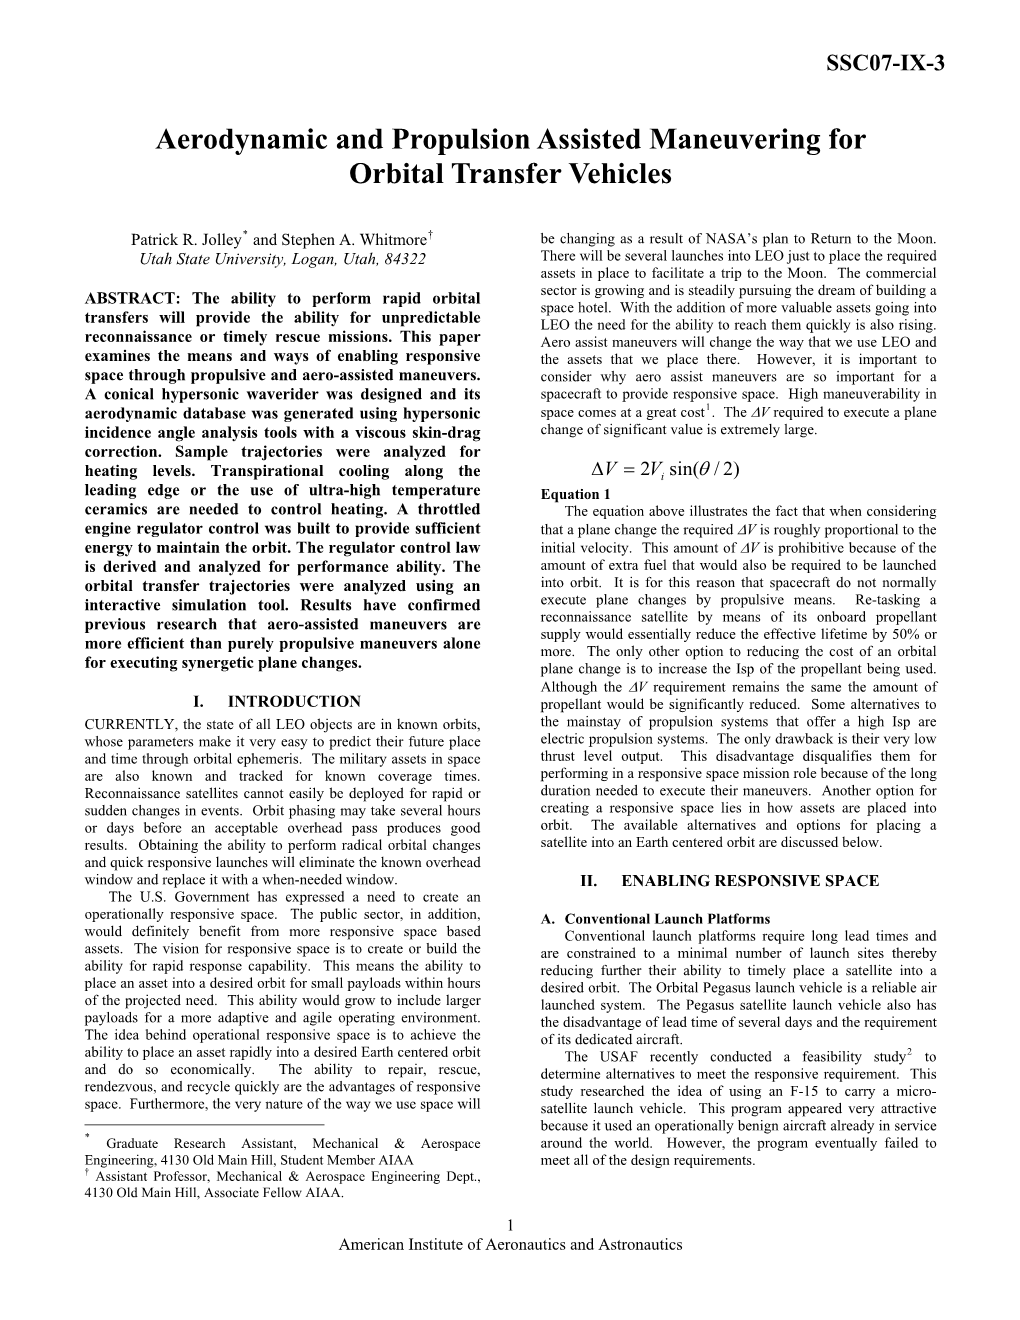 Aerodynamic and Propulsion Assisted Maneuvering for Orbital Transfer Vehicles